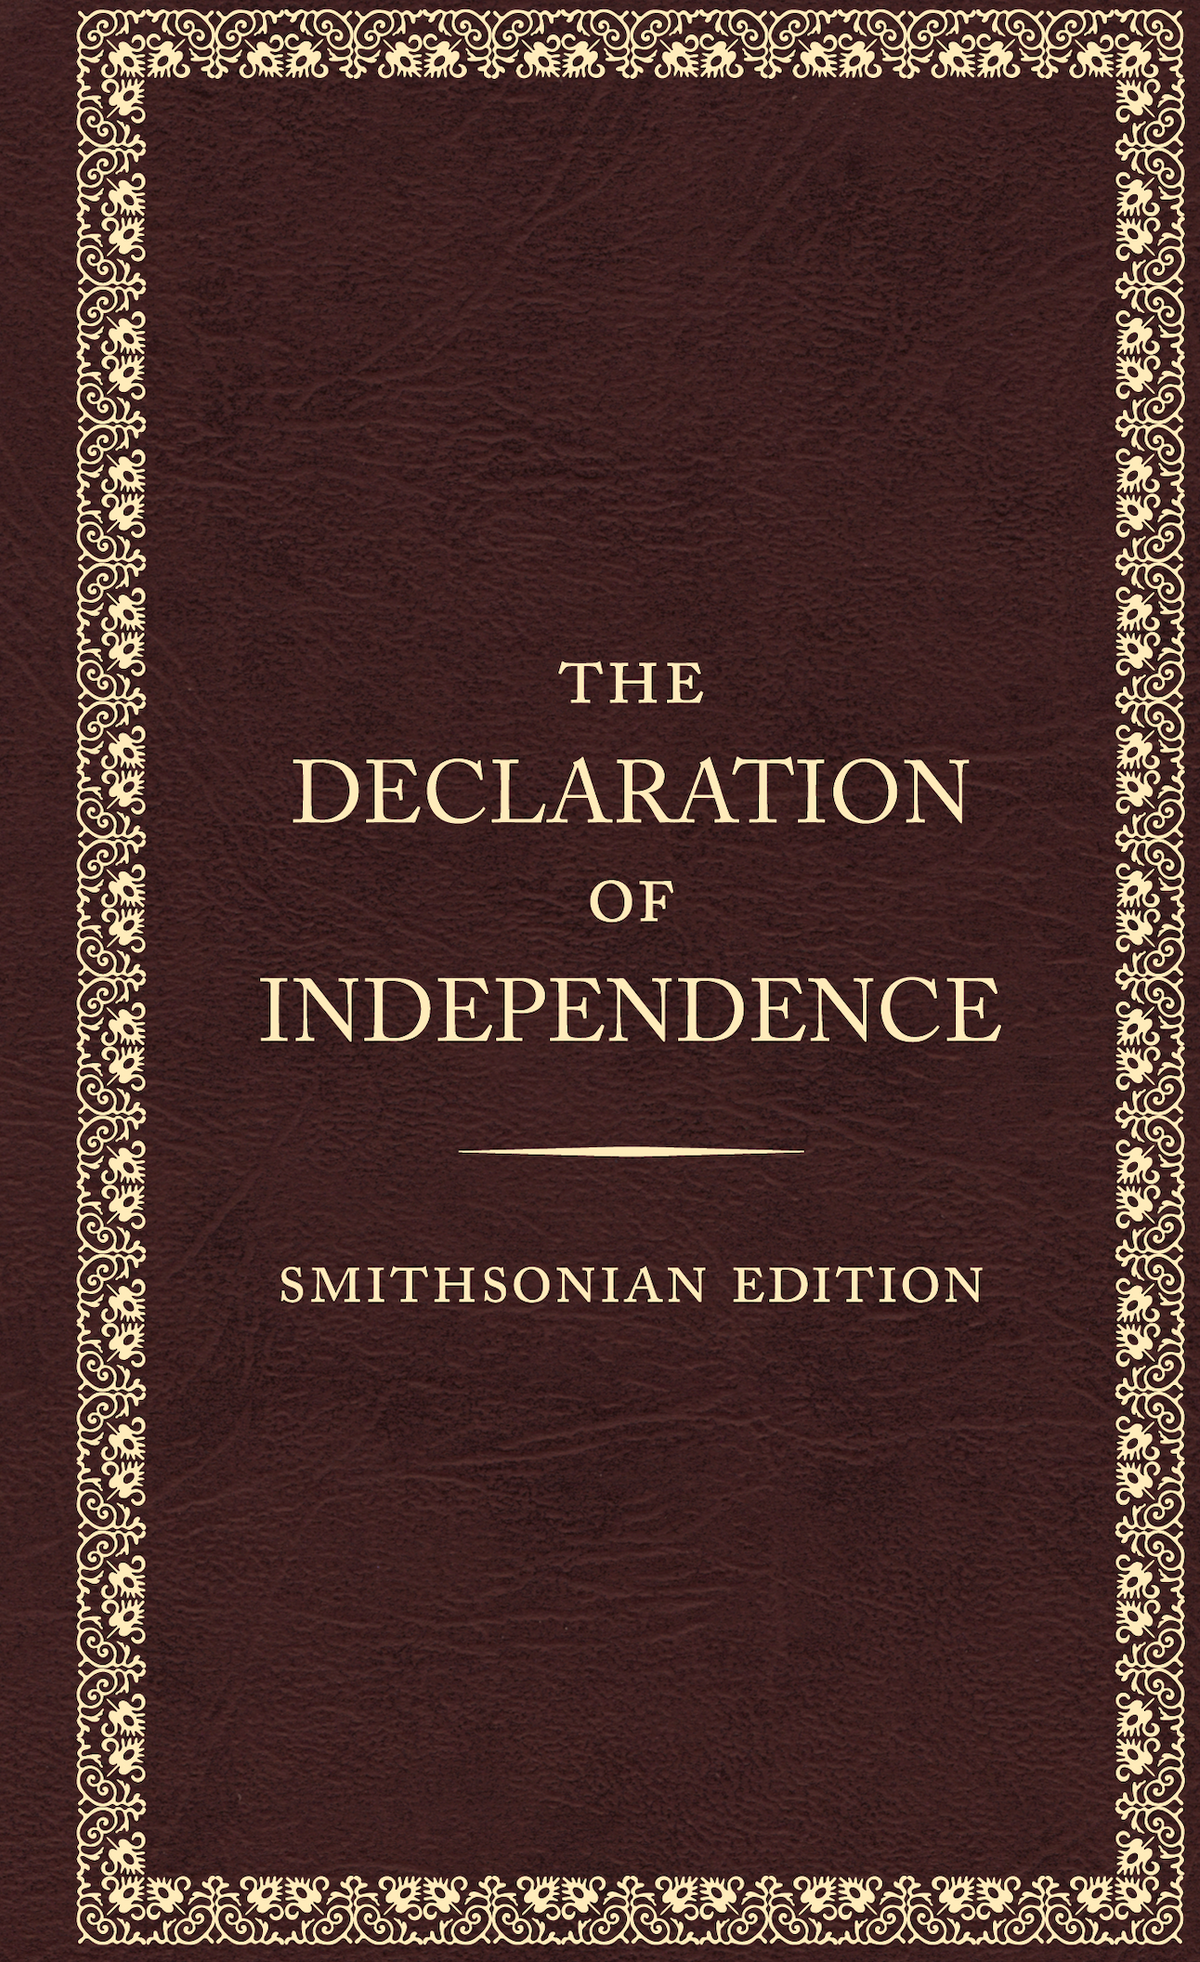 Smithsonian Edition of The Declaration of Independence Book